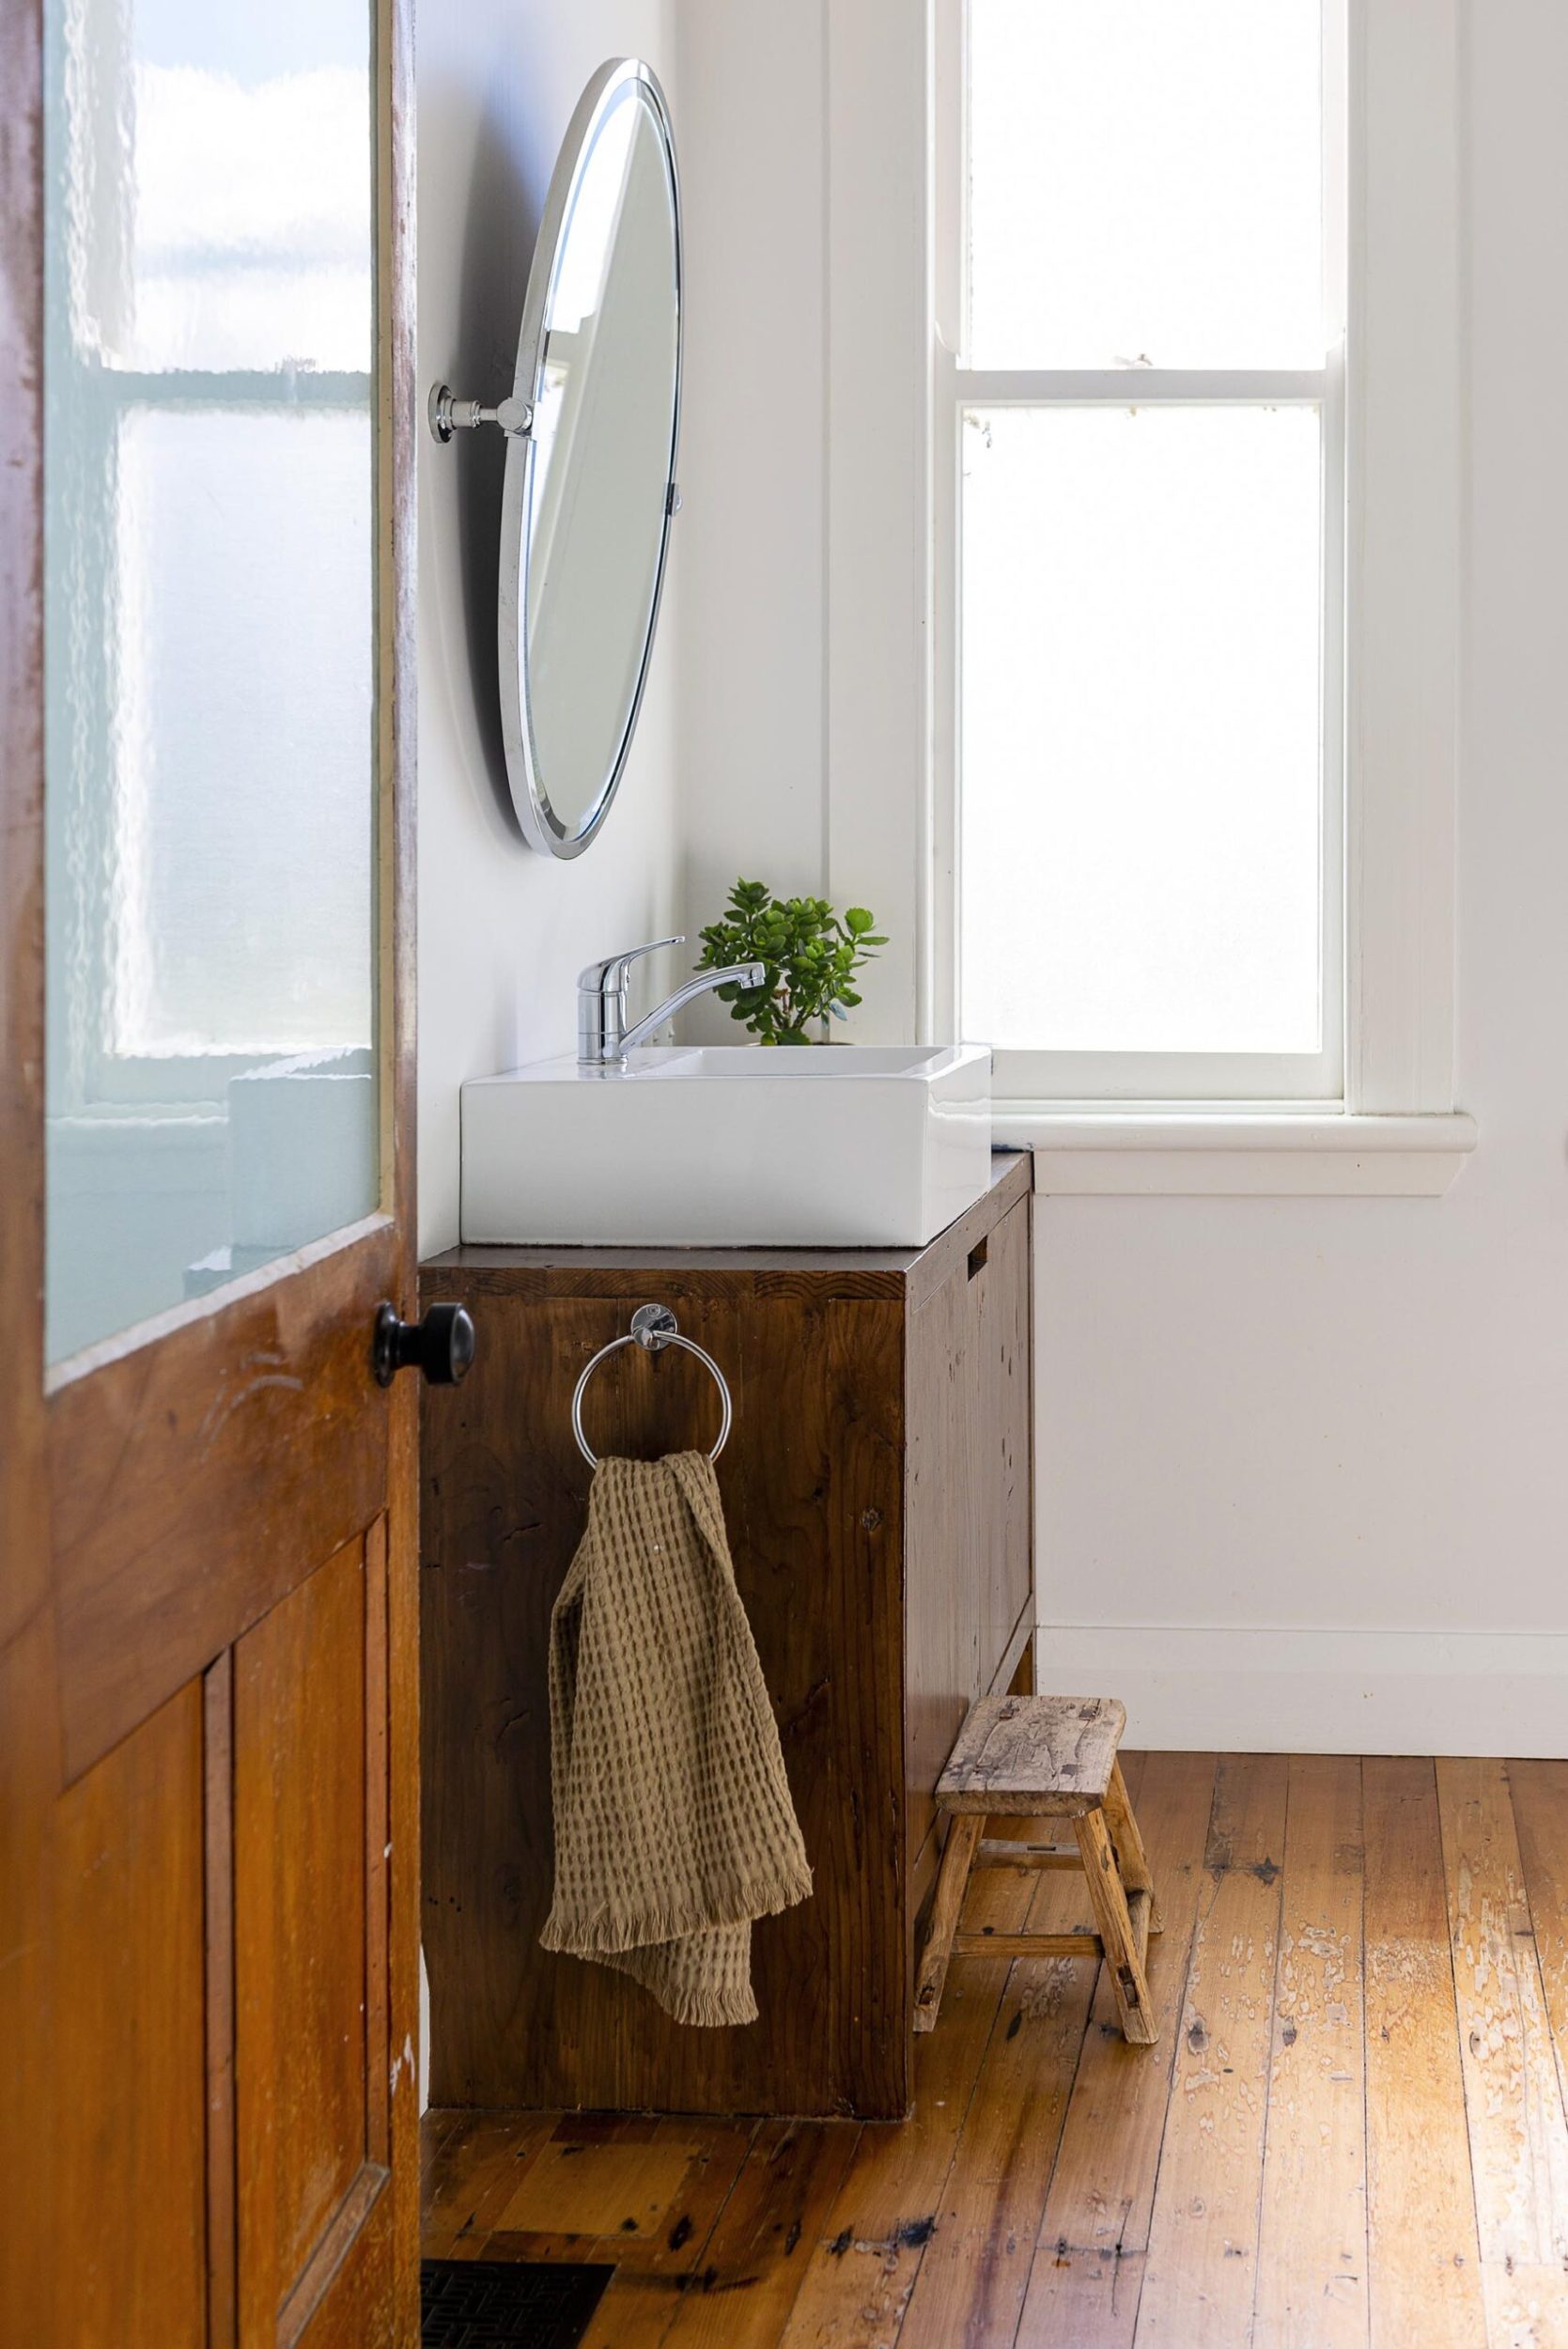 A bathroom with white walls, wooden floors, a round mirror and a wood sink cabinet 